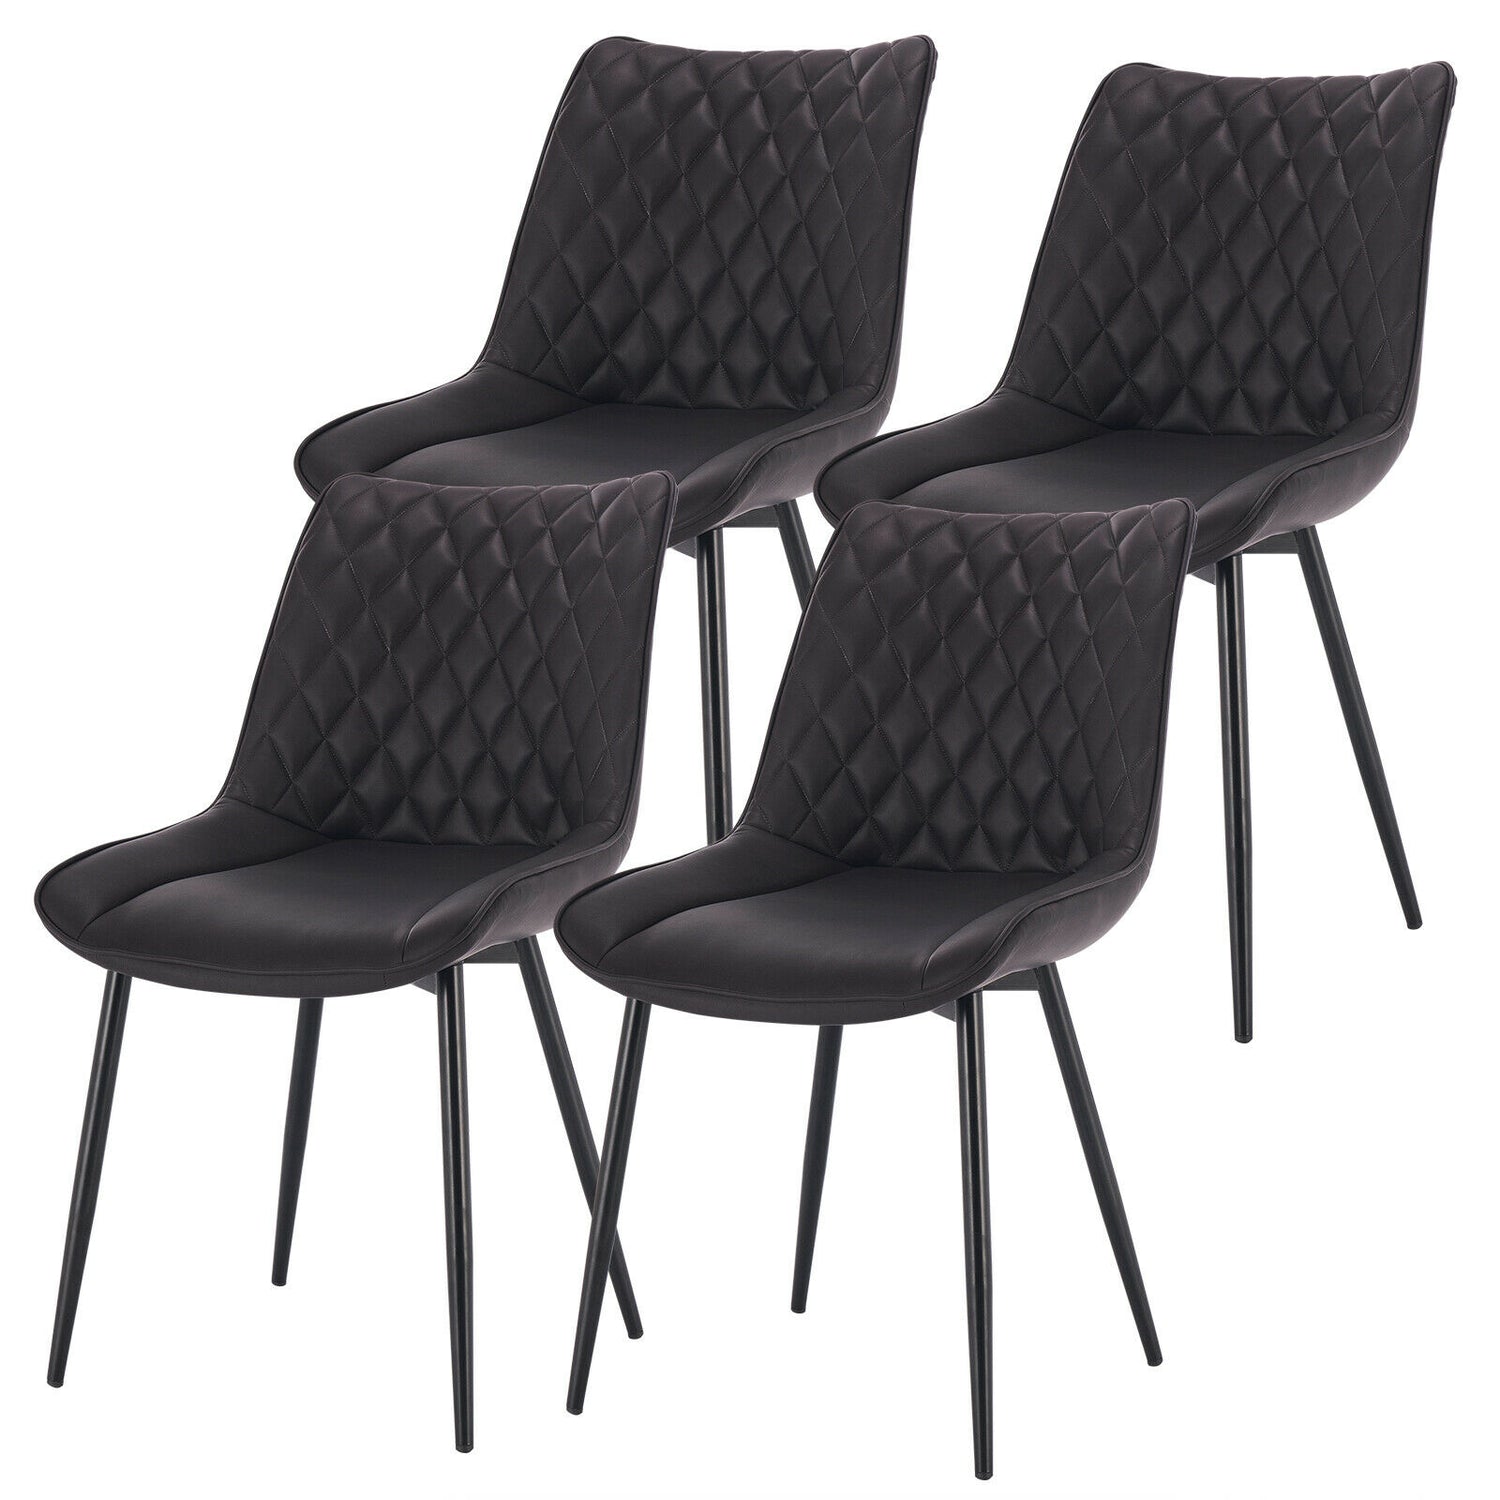 Wilcox Dining Chairs Chairs Masterplank UK Anthracite Set of 2 